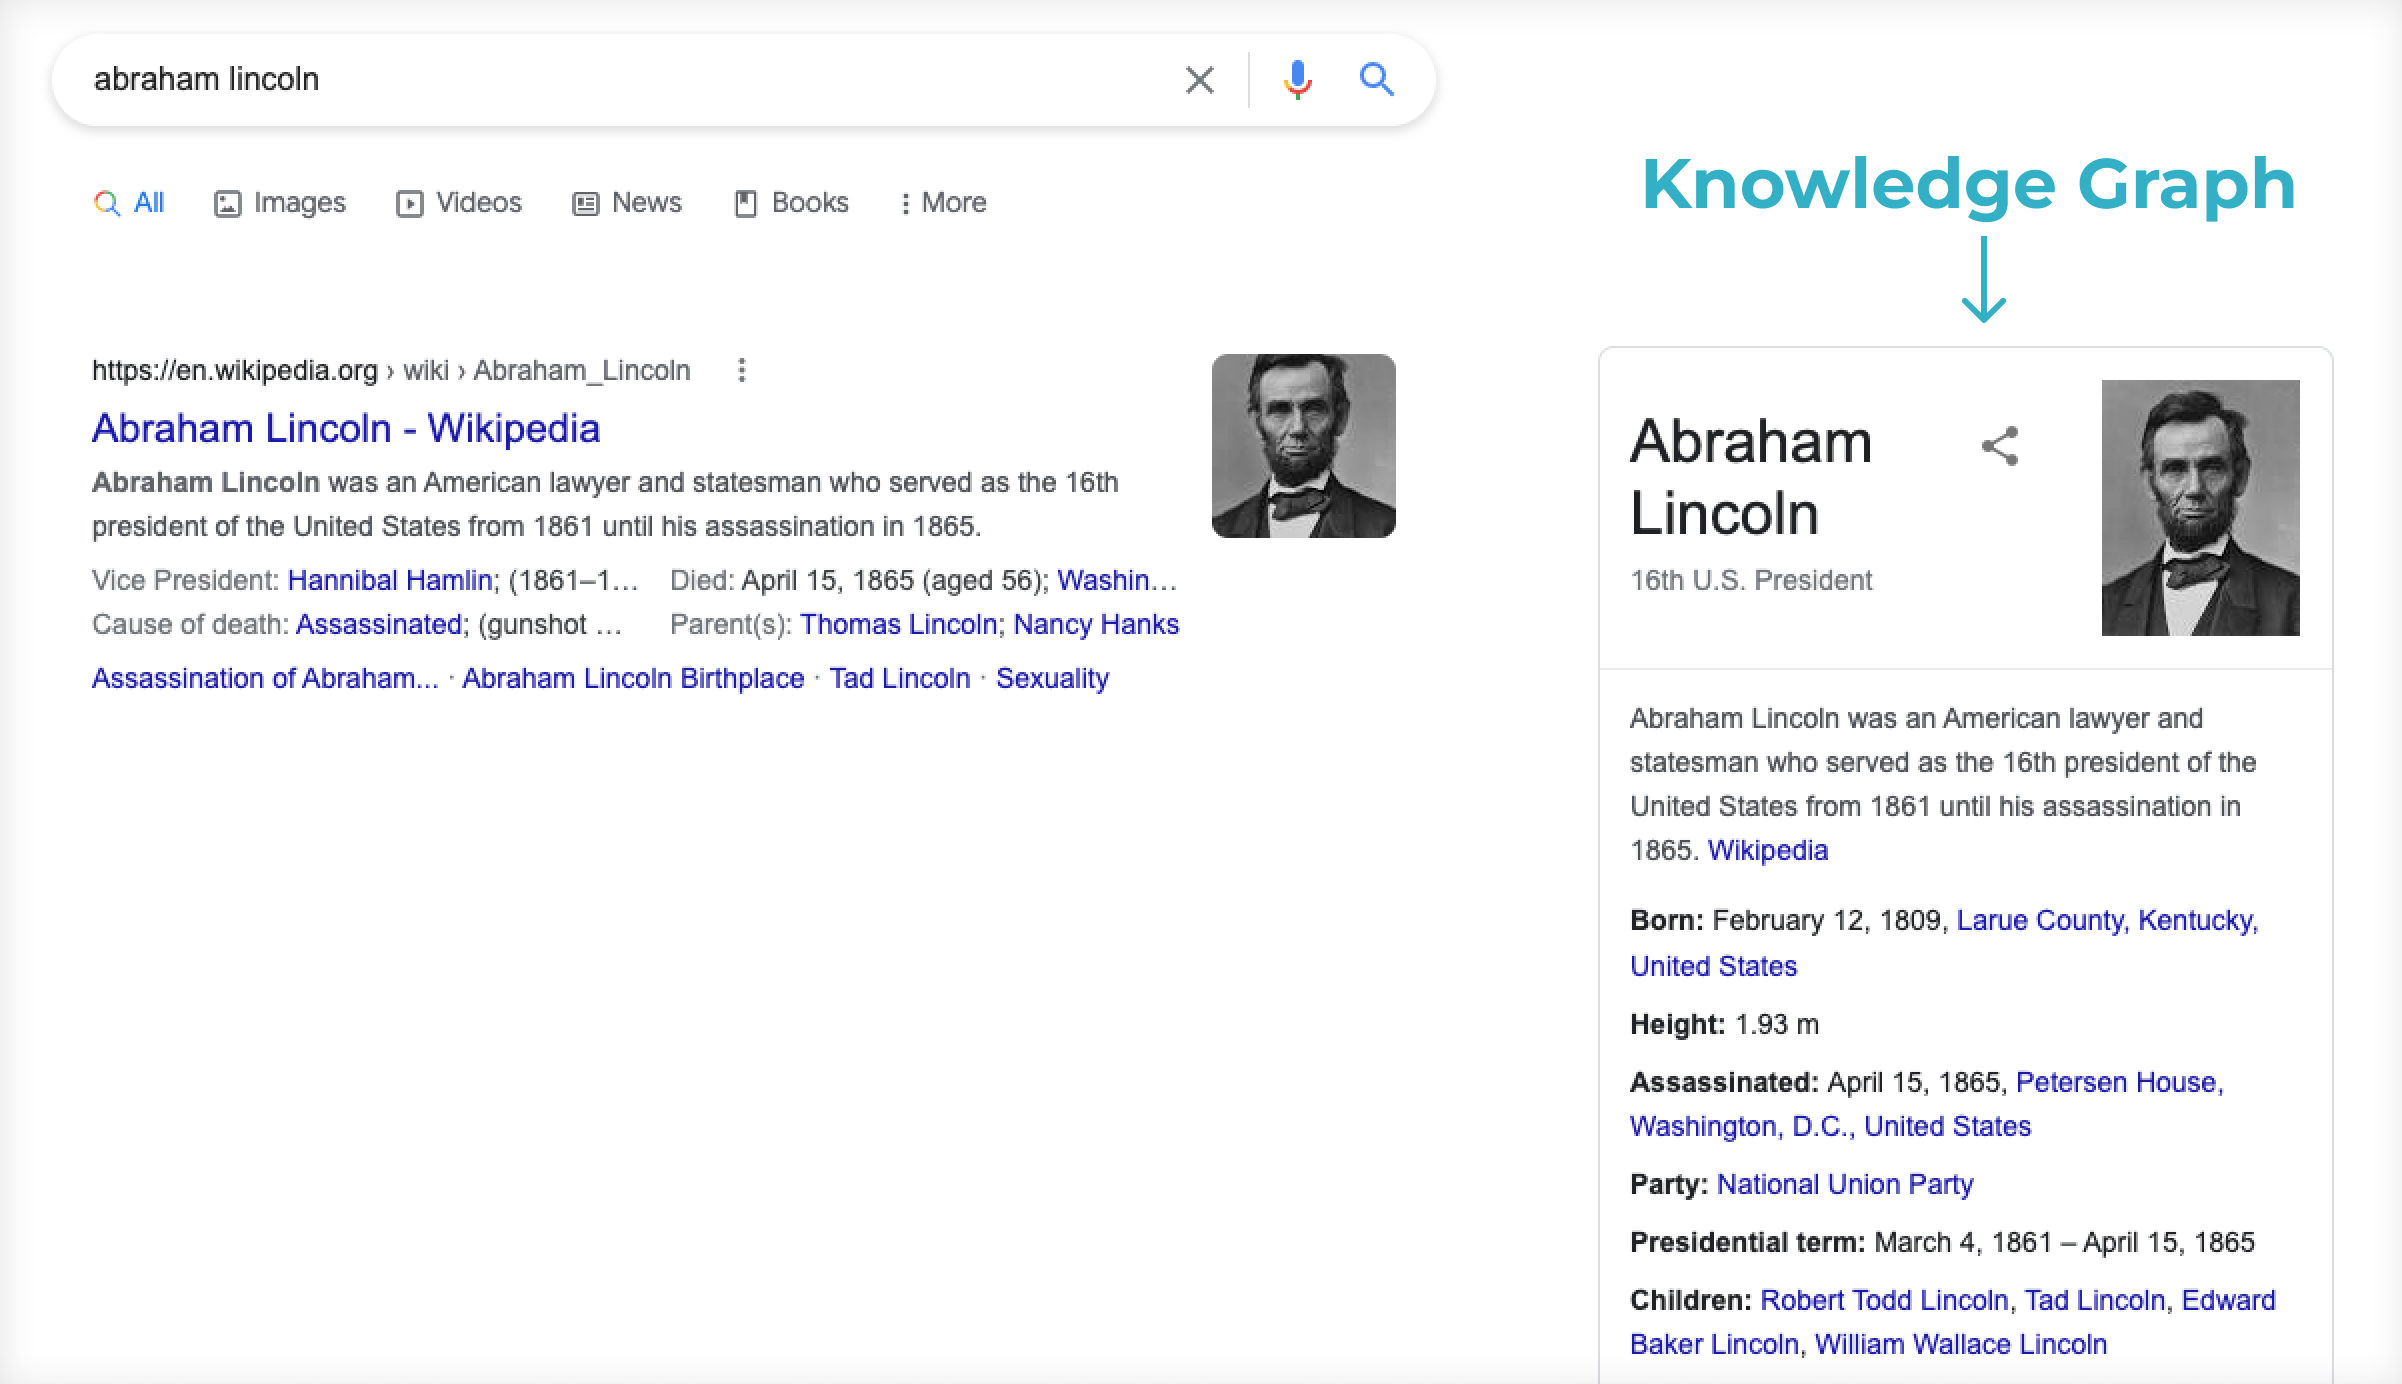 How Google knowledge graph learns.